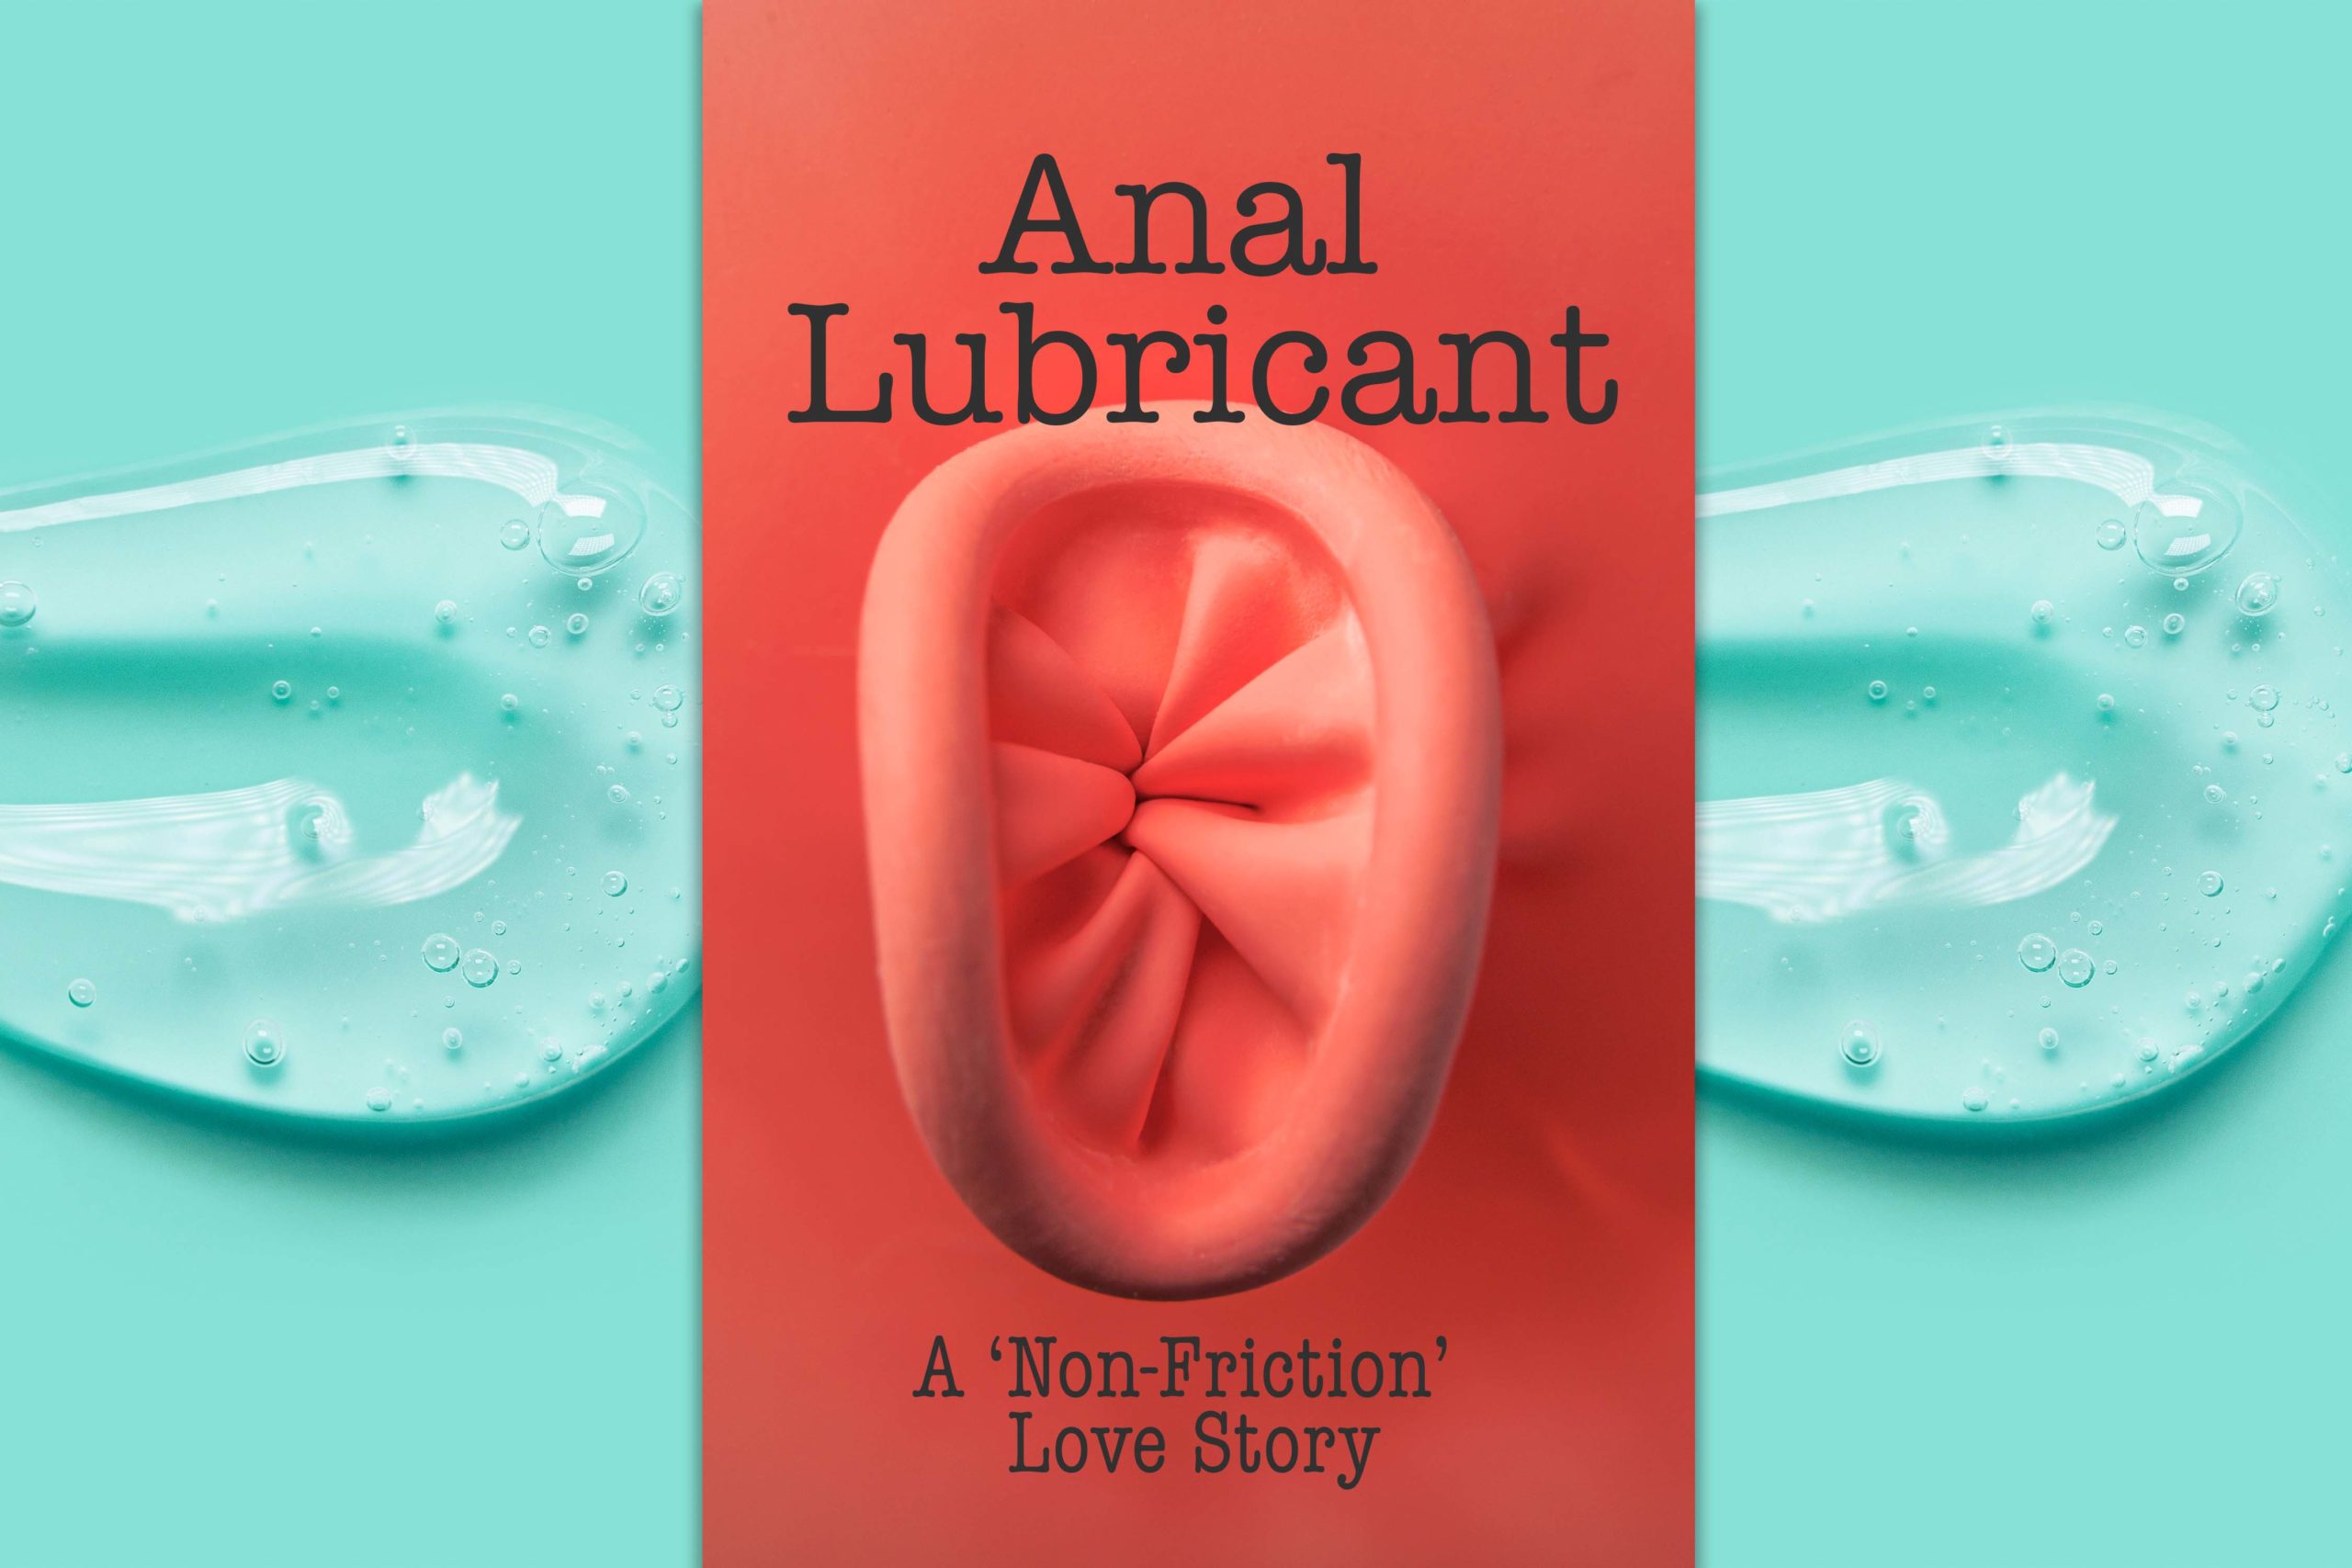 Anal lubricant: A 'Non-Friction' Love Story - Positive Peers